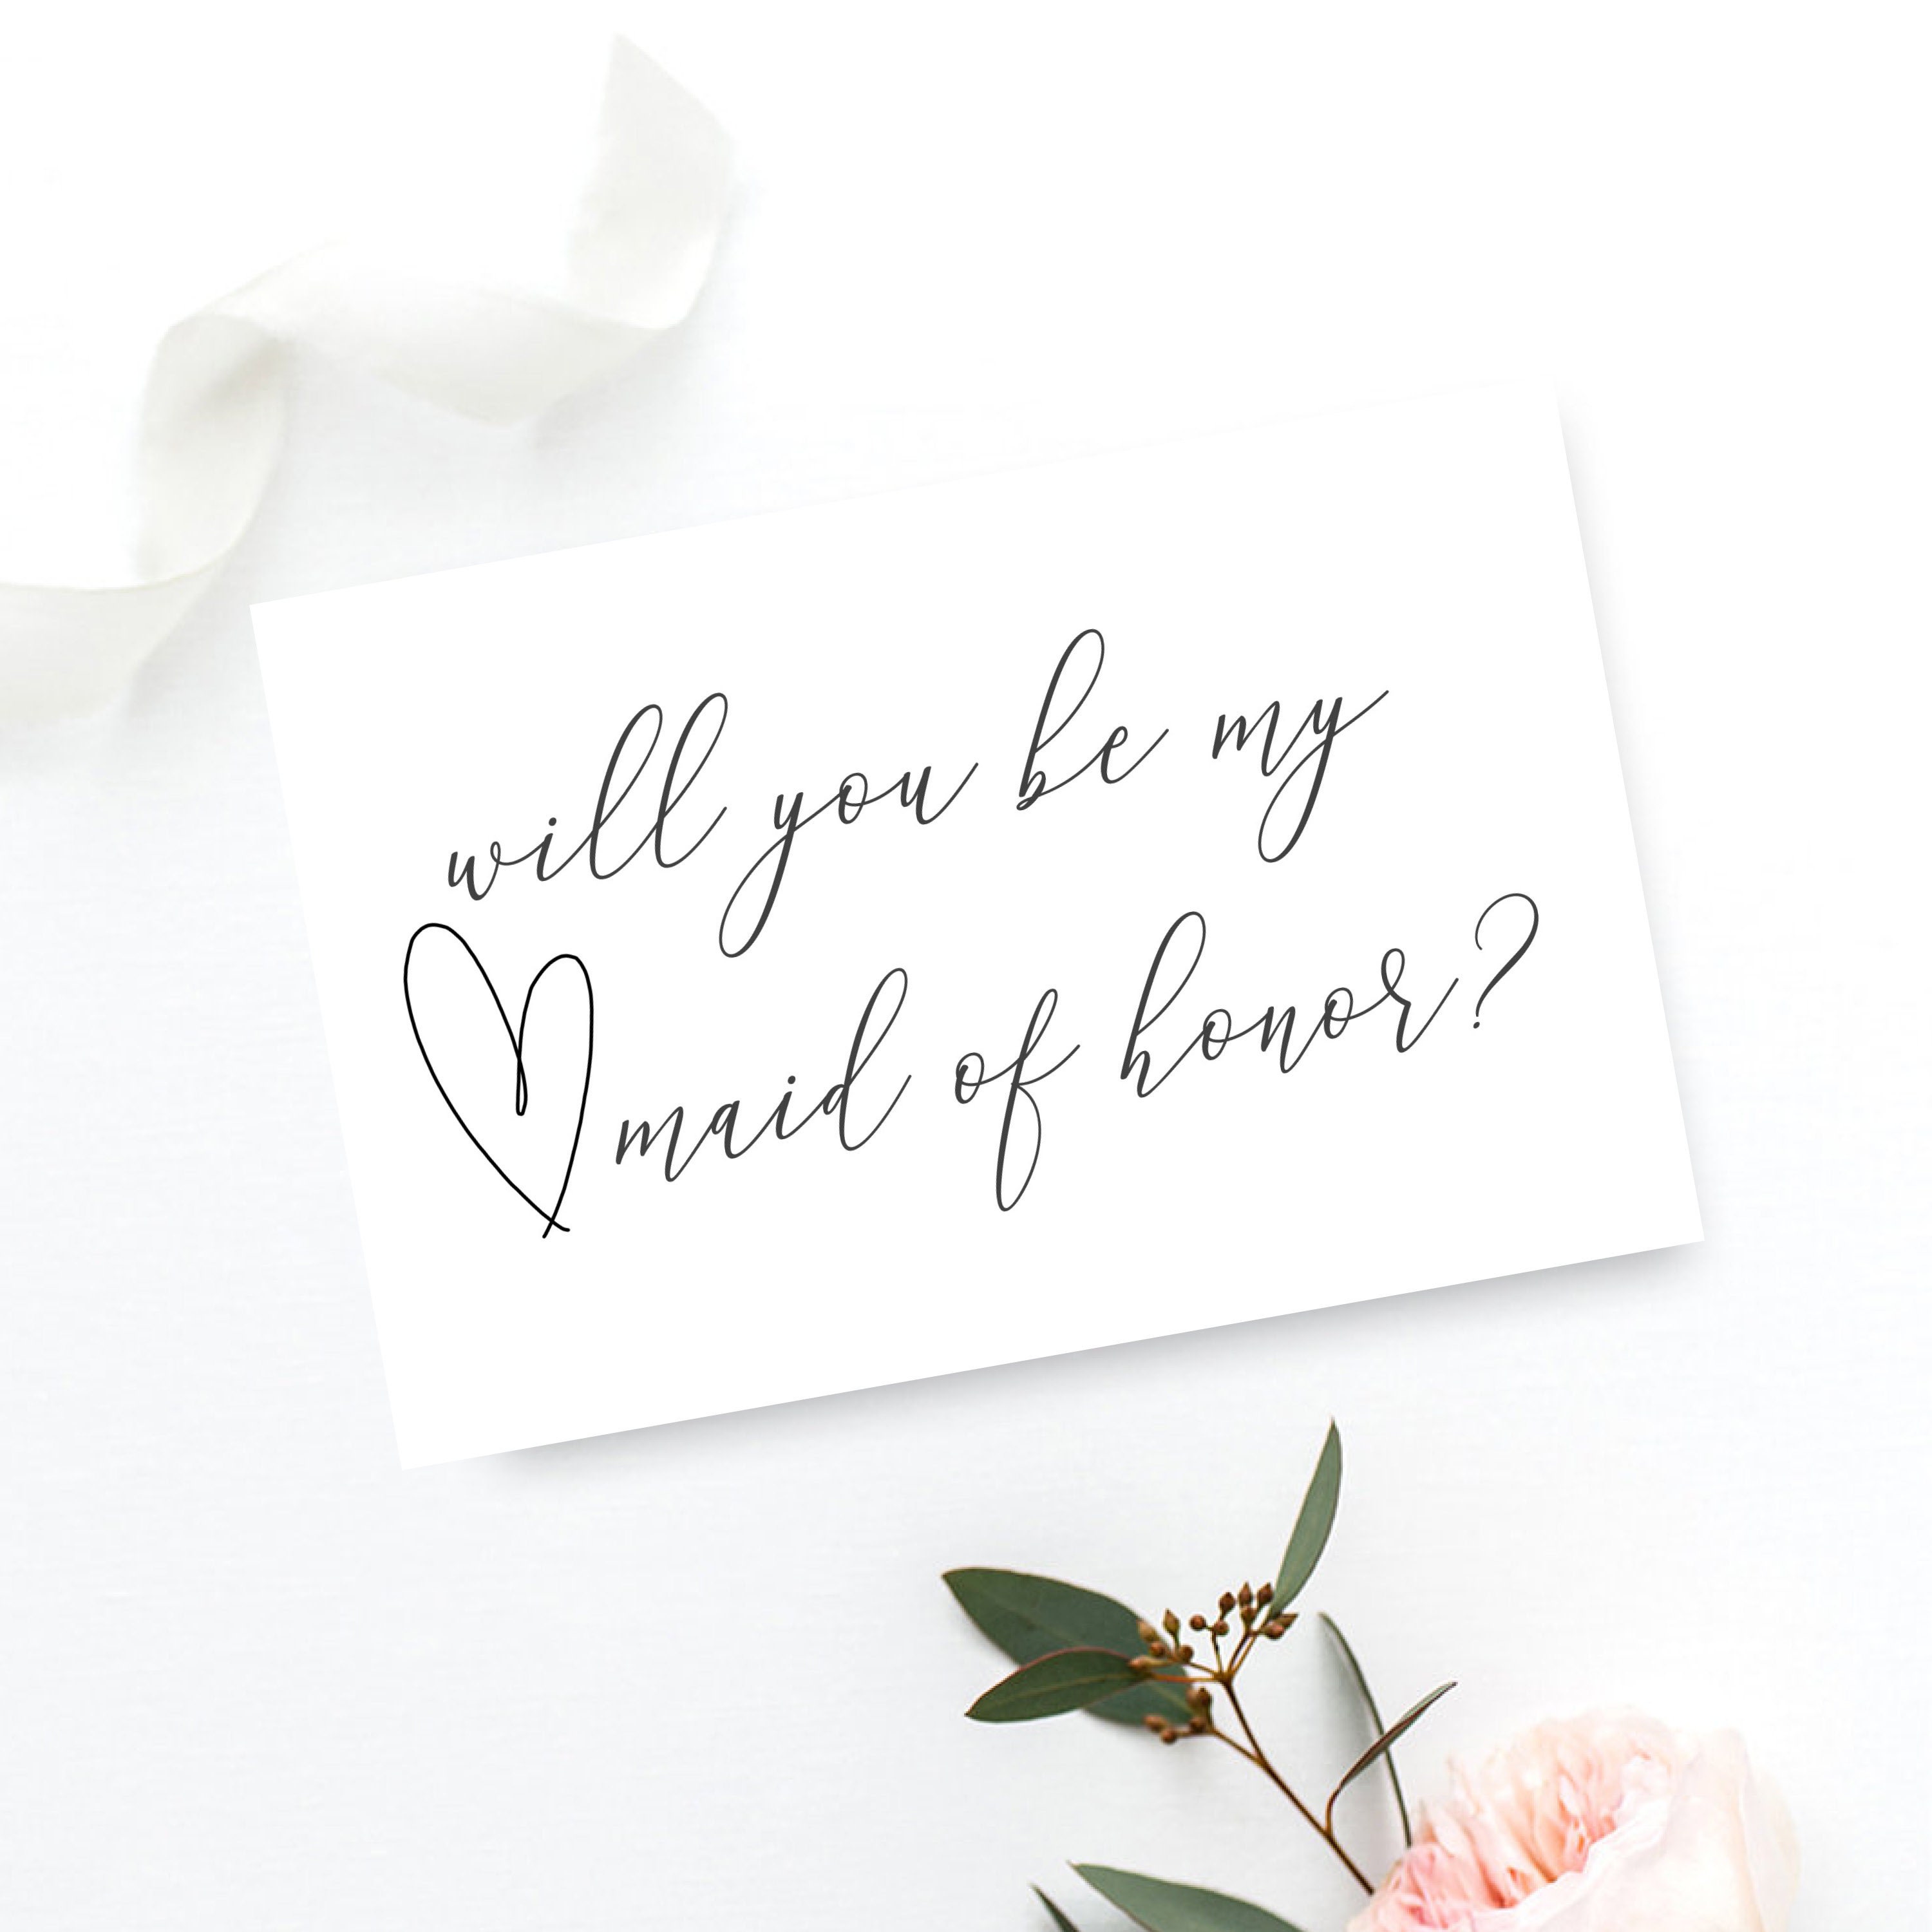 will-you-be-my-maid-of-honor-printable-proposal-card-etsy